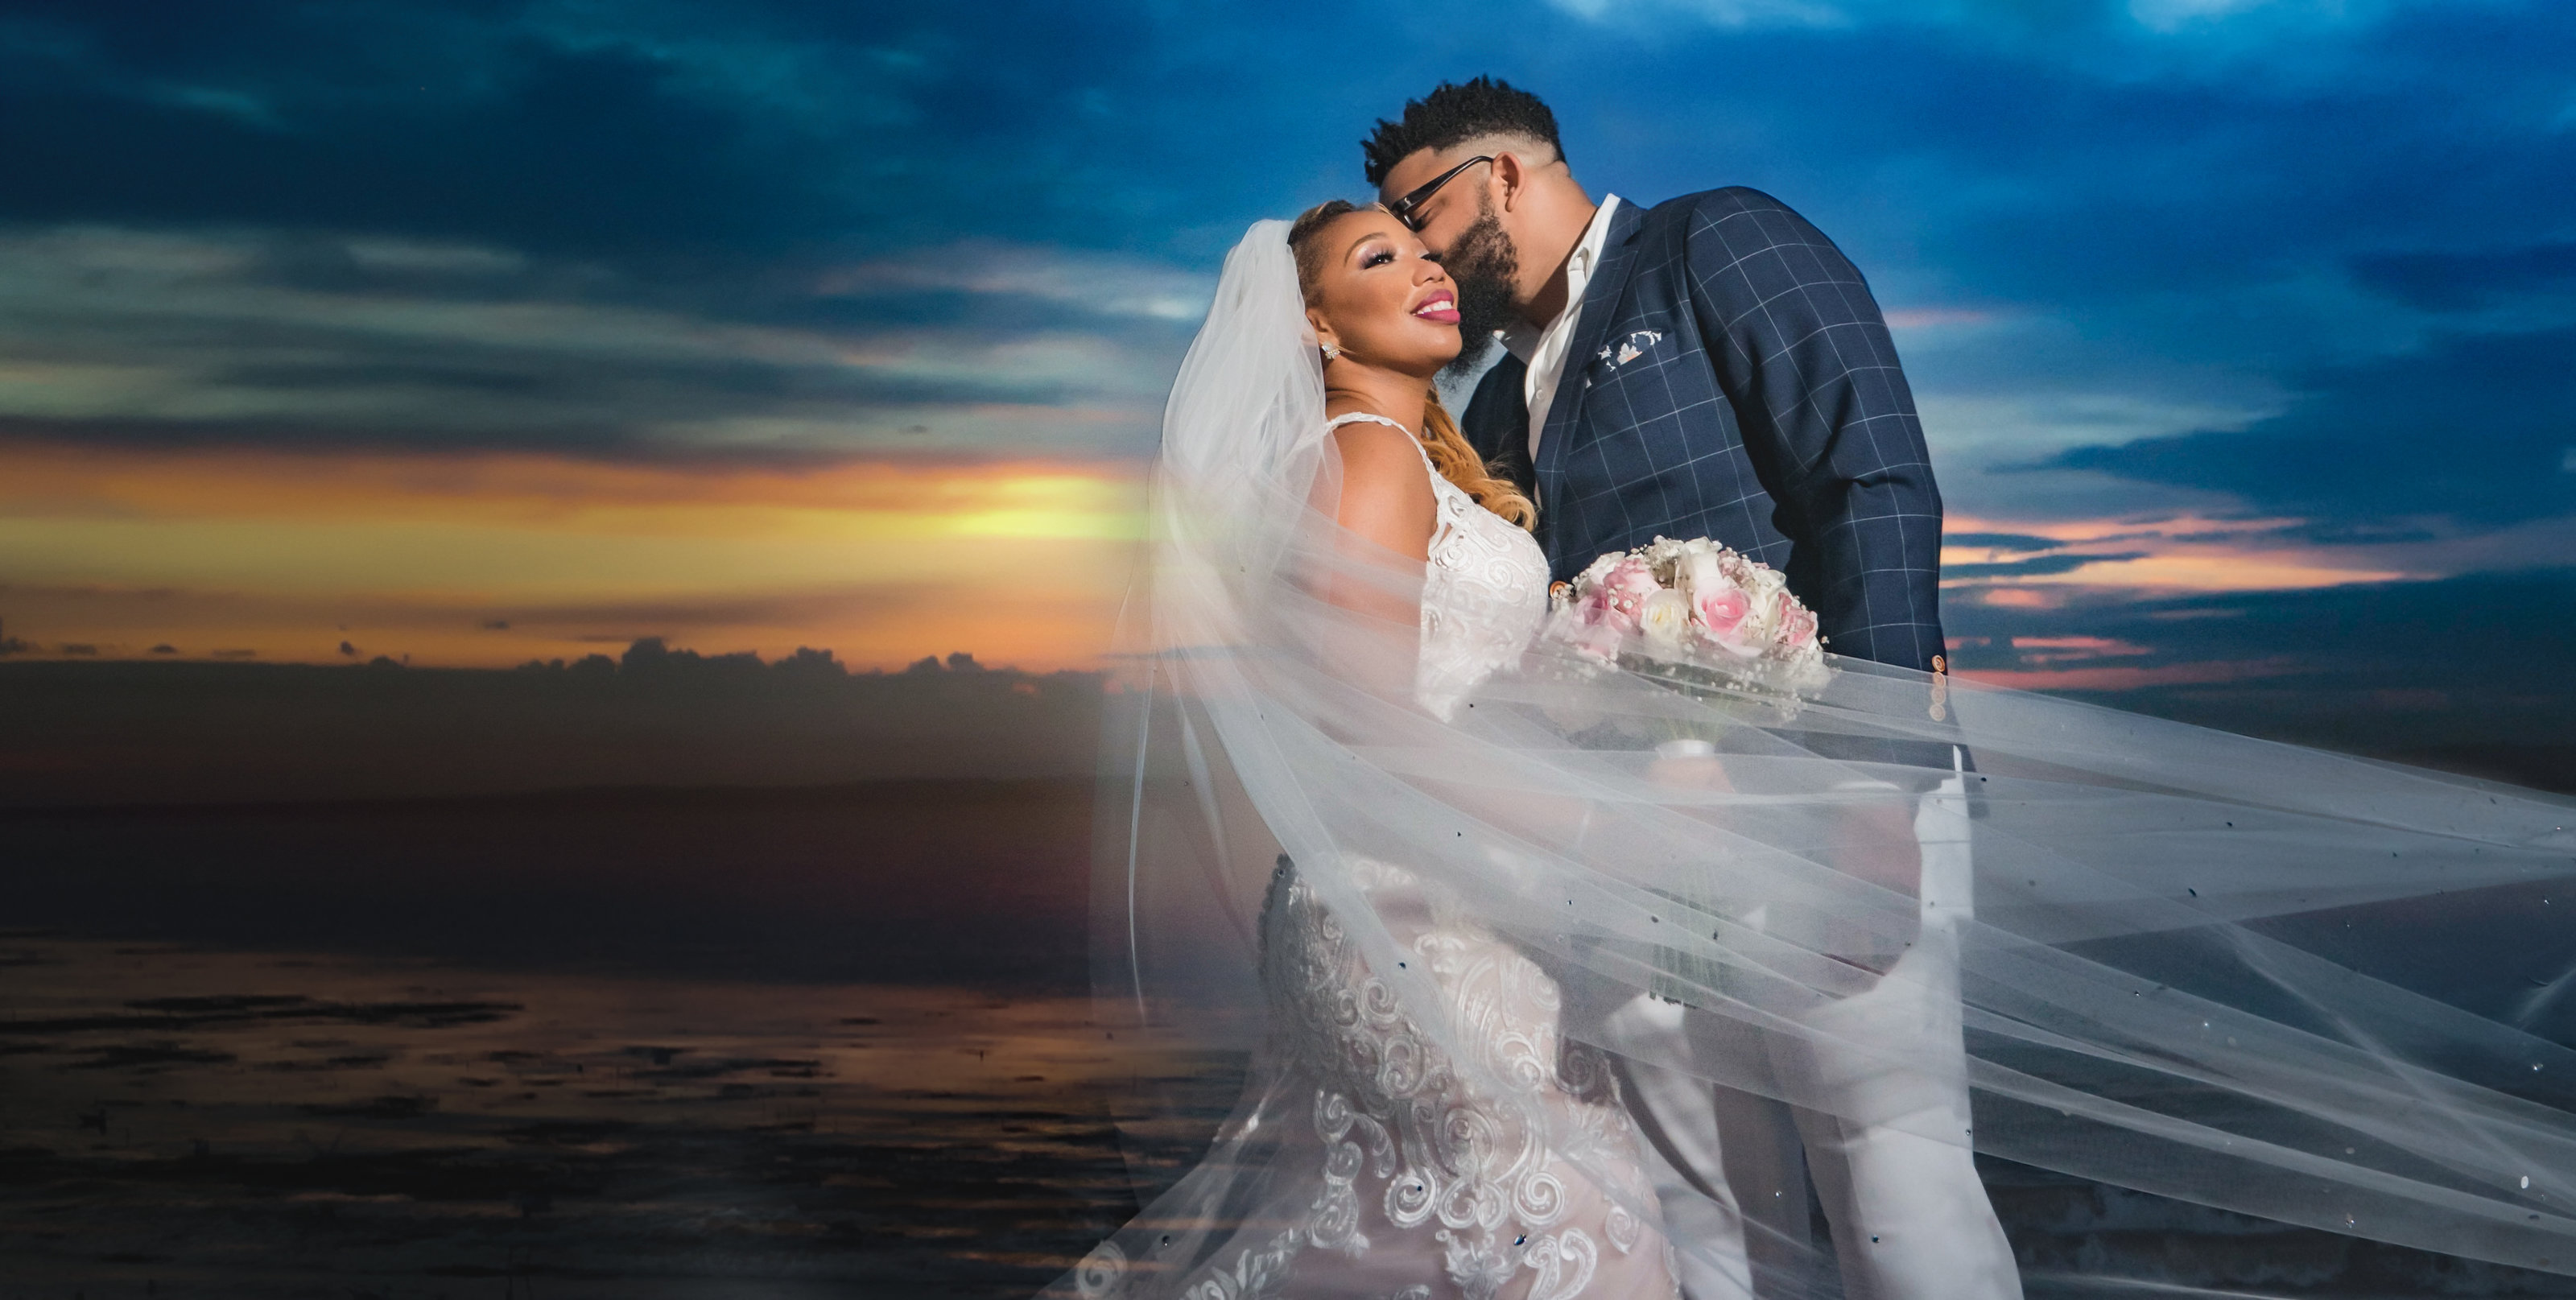 amazing sunset portrait of couple on the beach after wedding